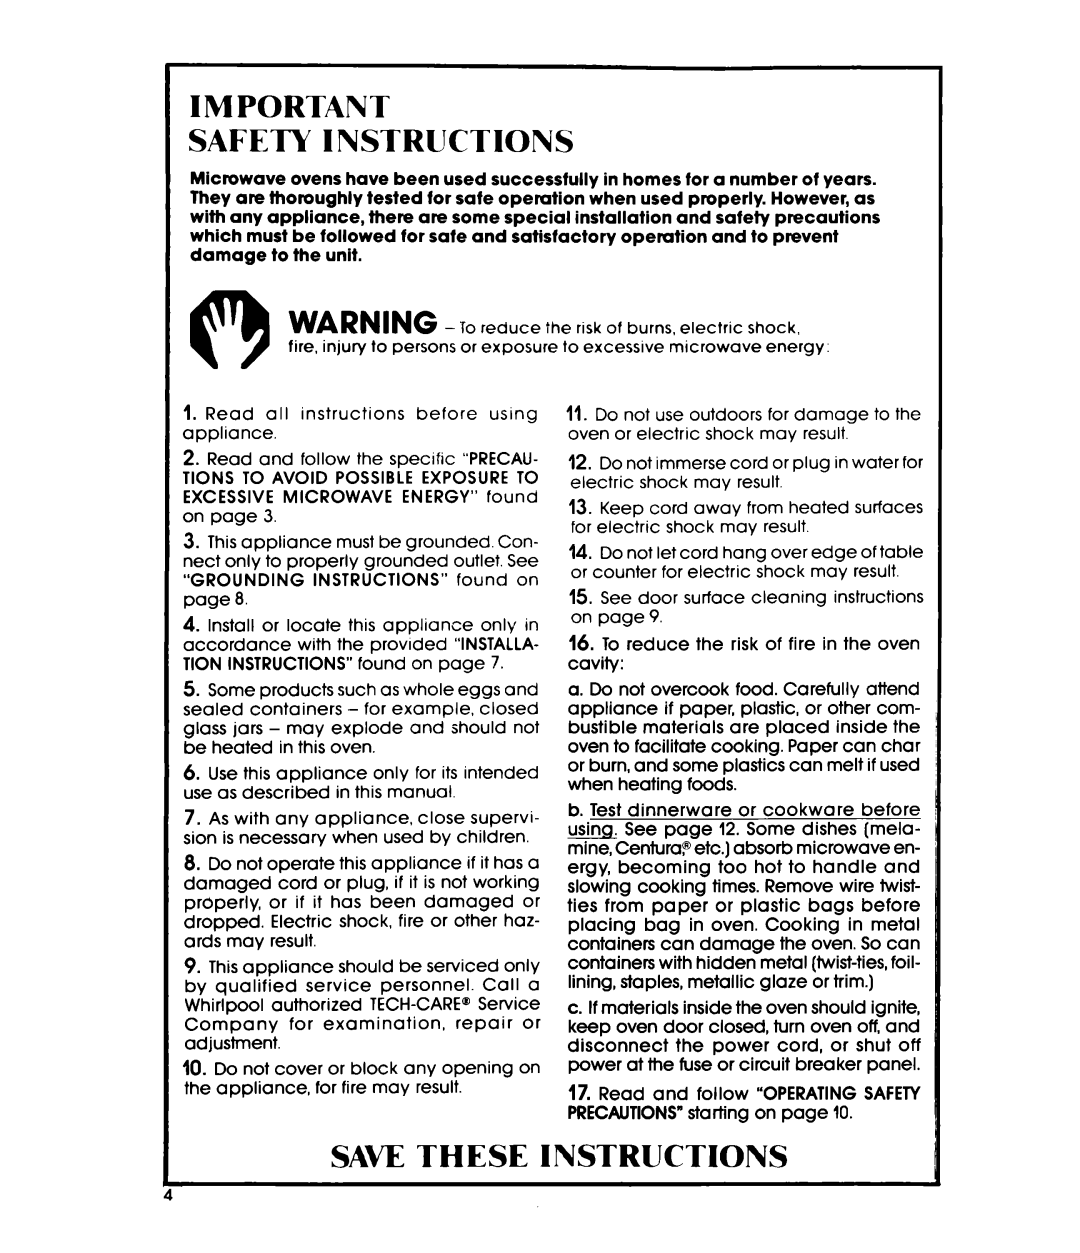 Whirlpool MW3OOOXP manual Safety Instructions, Save These Instructions 